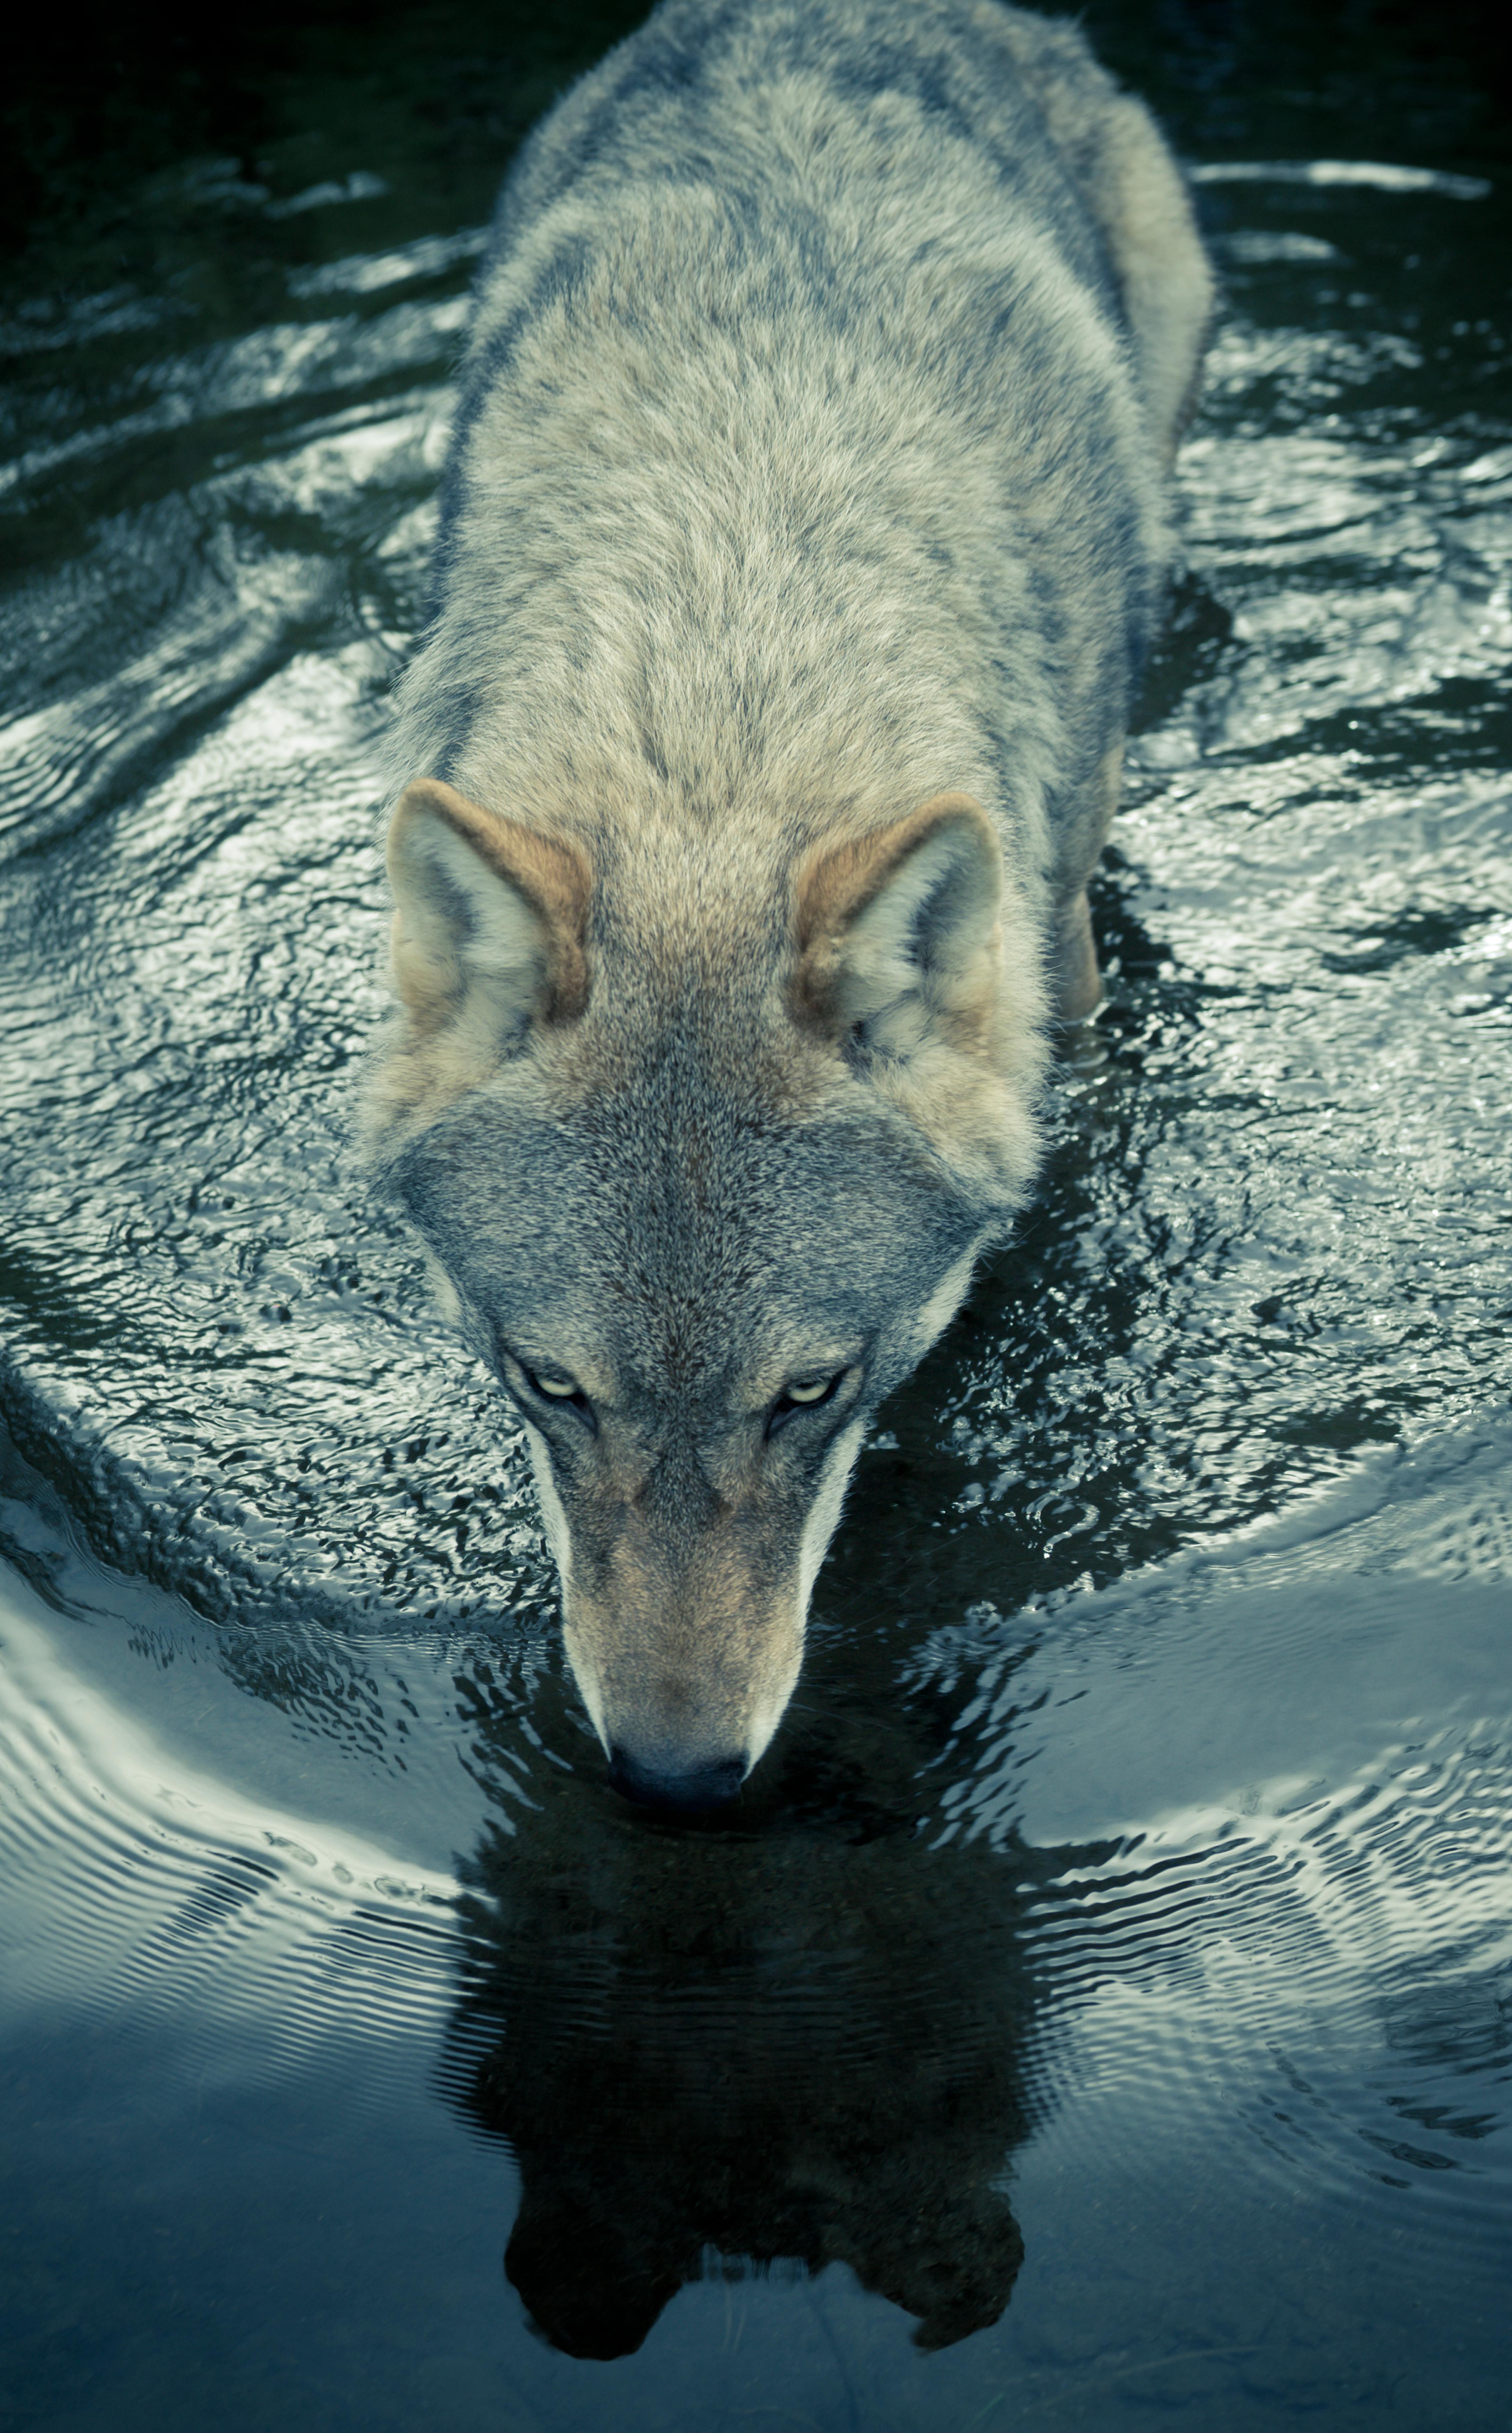 Christian Houge Color Photograph - `Untitled 3`, Norway 2012 wolf nature forest animal